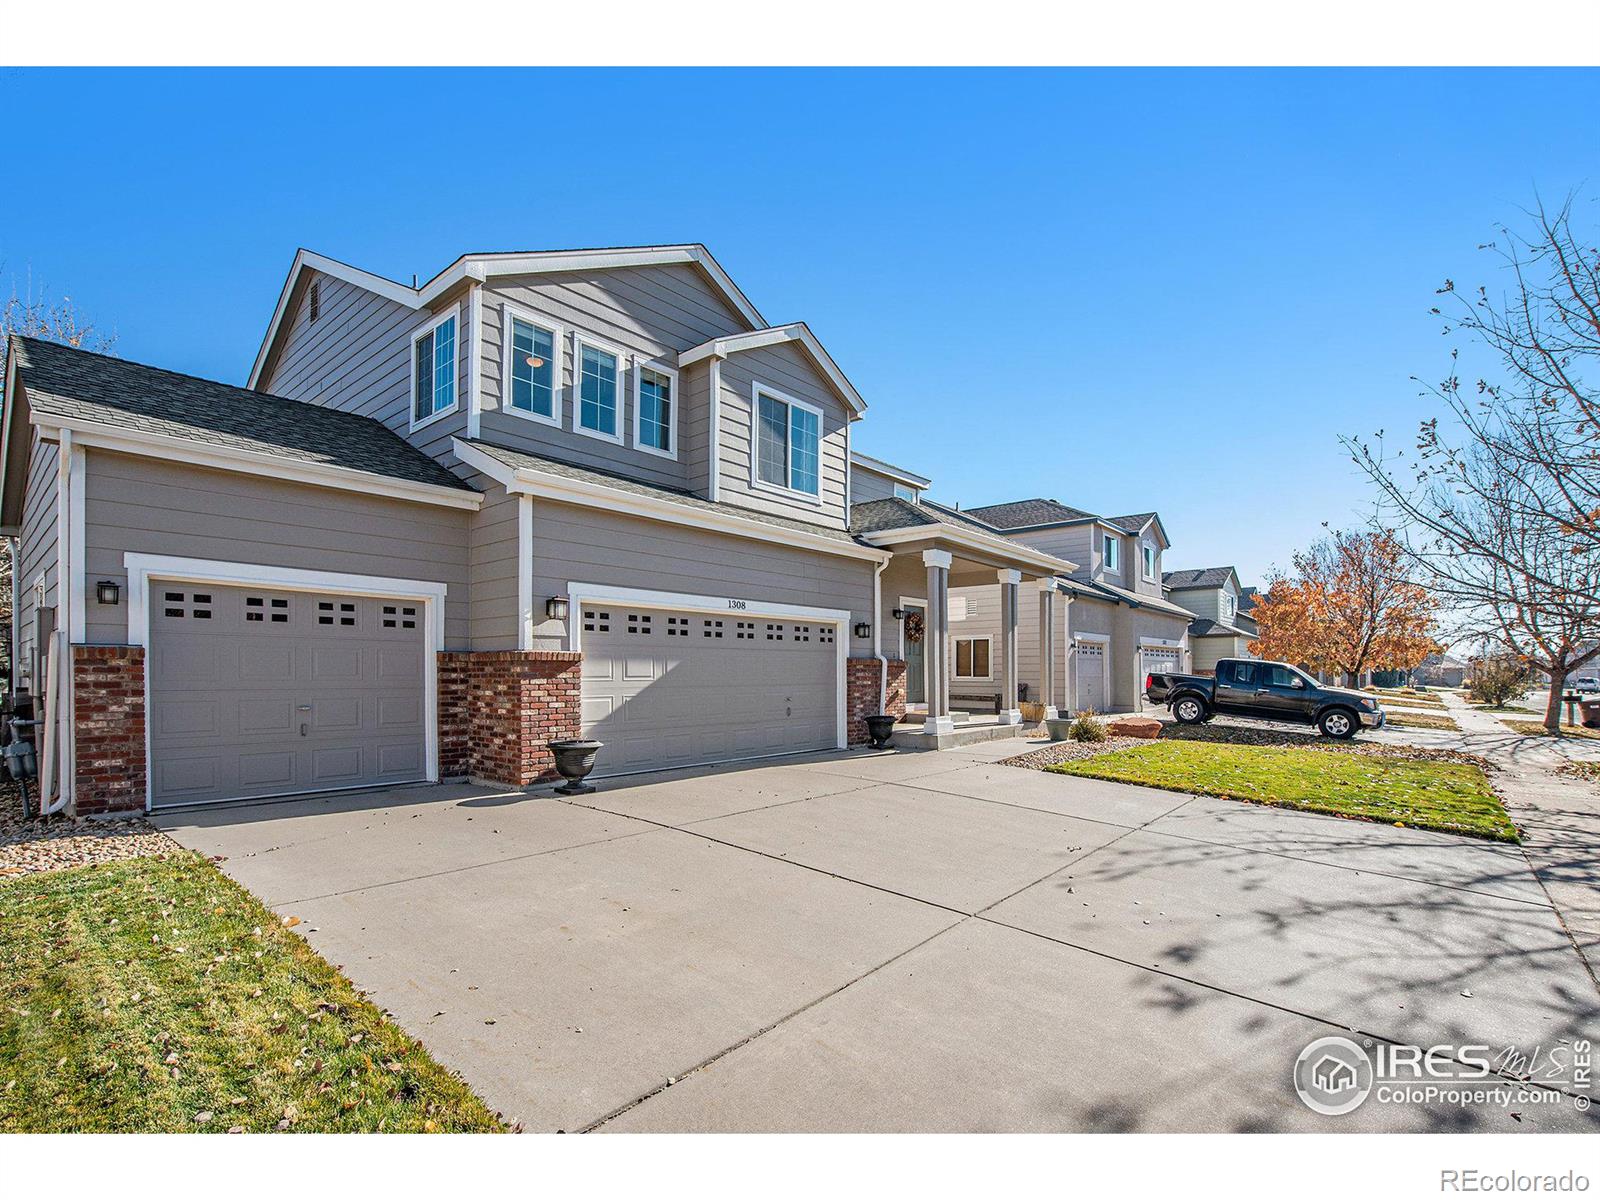 Report Image for 1308  101st Ave Ct,Greeley, Colorado